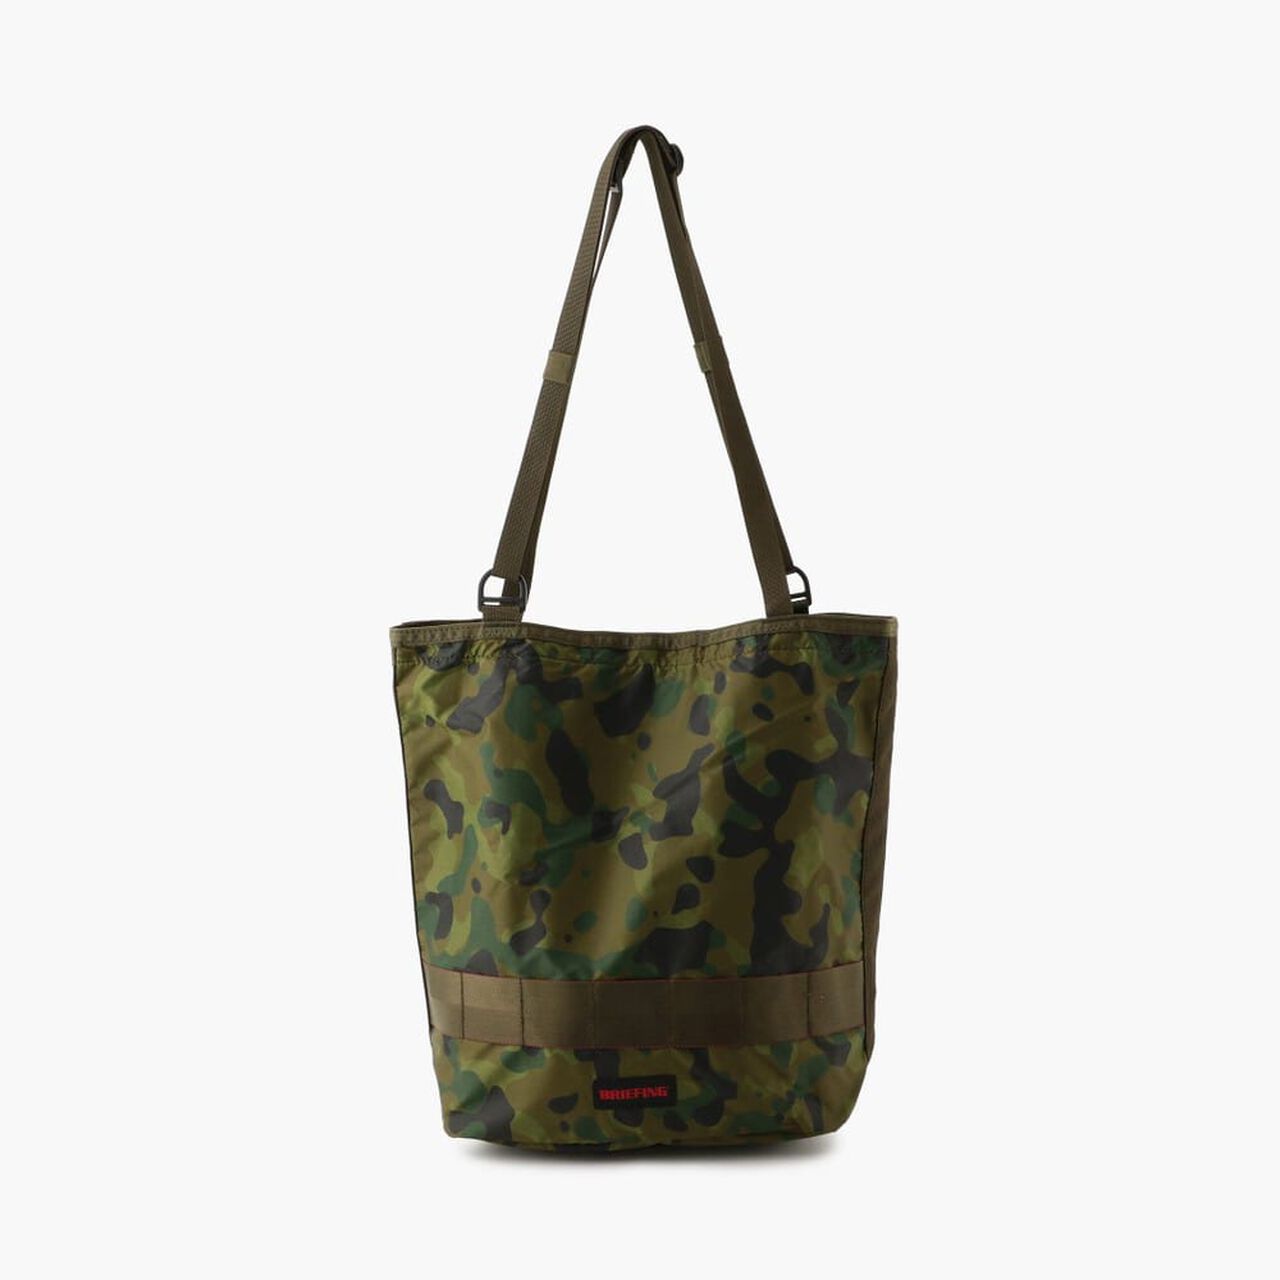 2WAY TOTE SL PACKABLE SM,Tropic Camofl, large image number 1